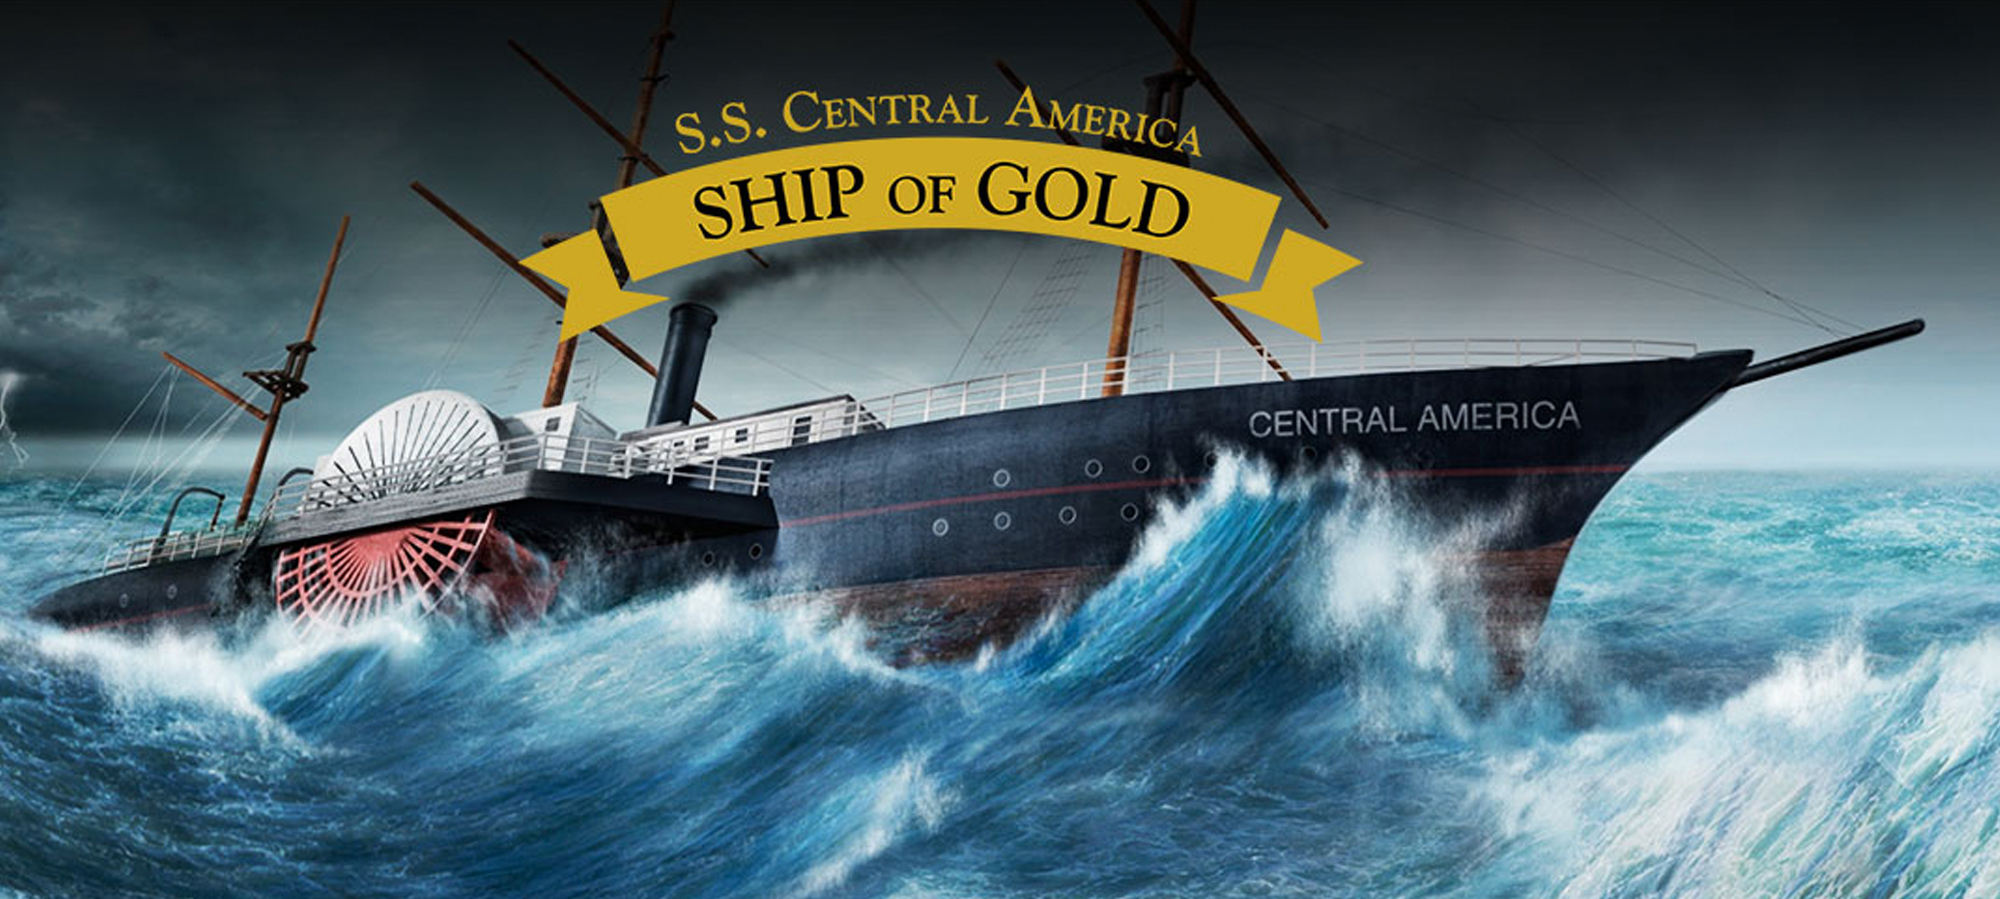 SS Central America Ship of Gold Horde